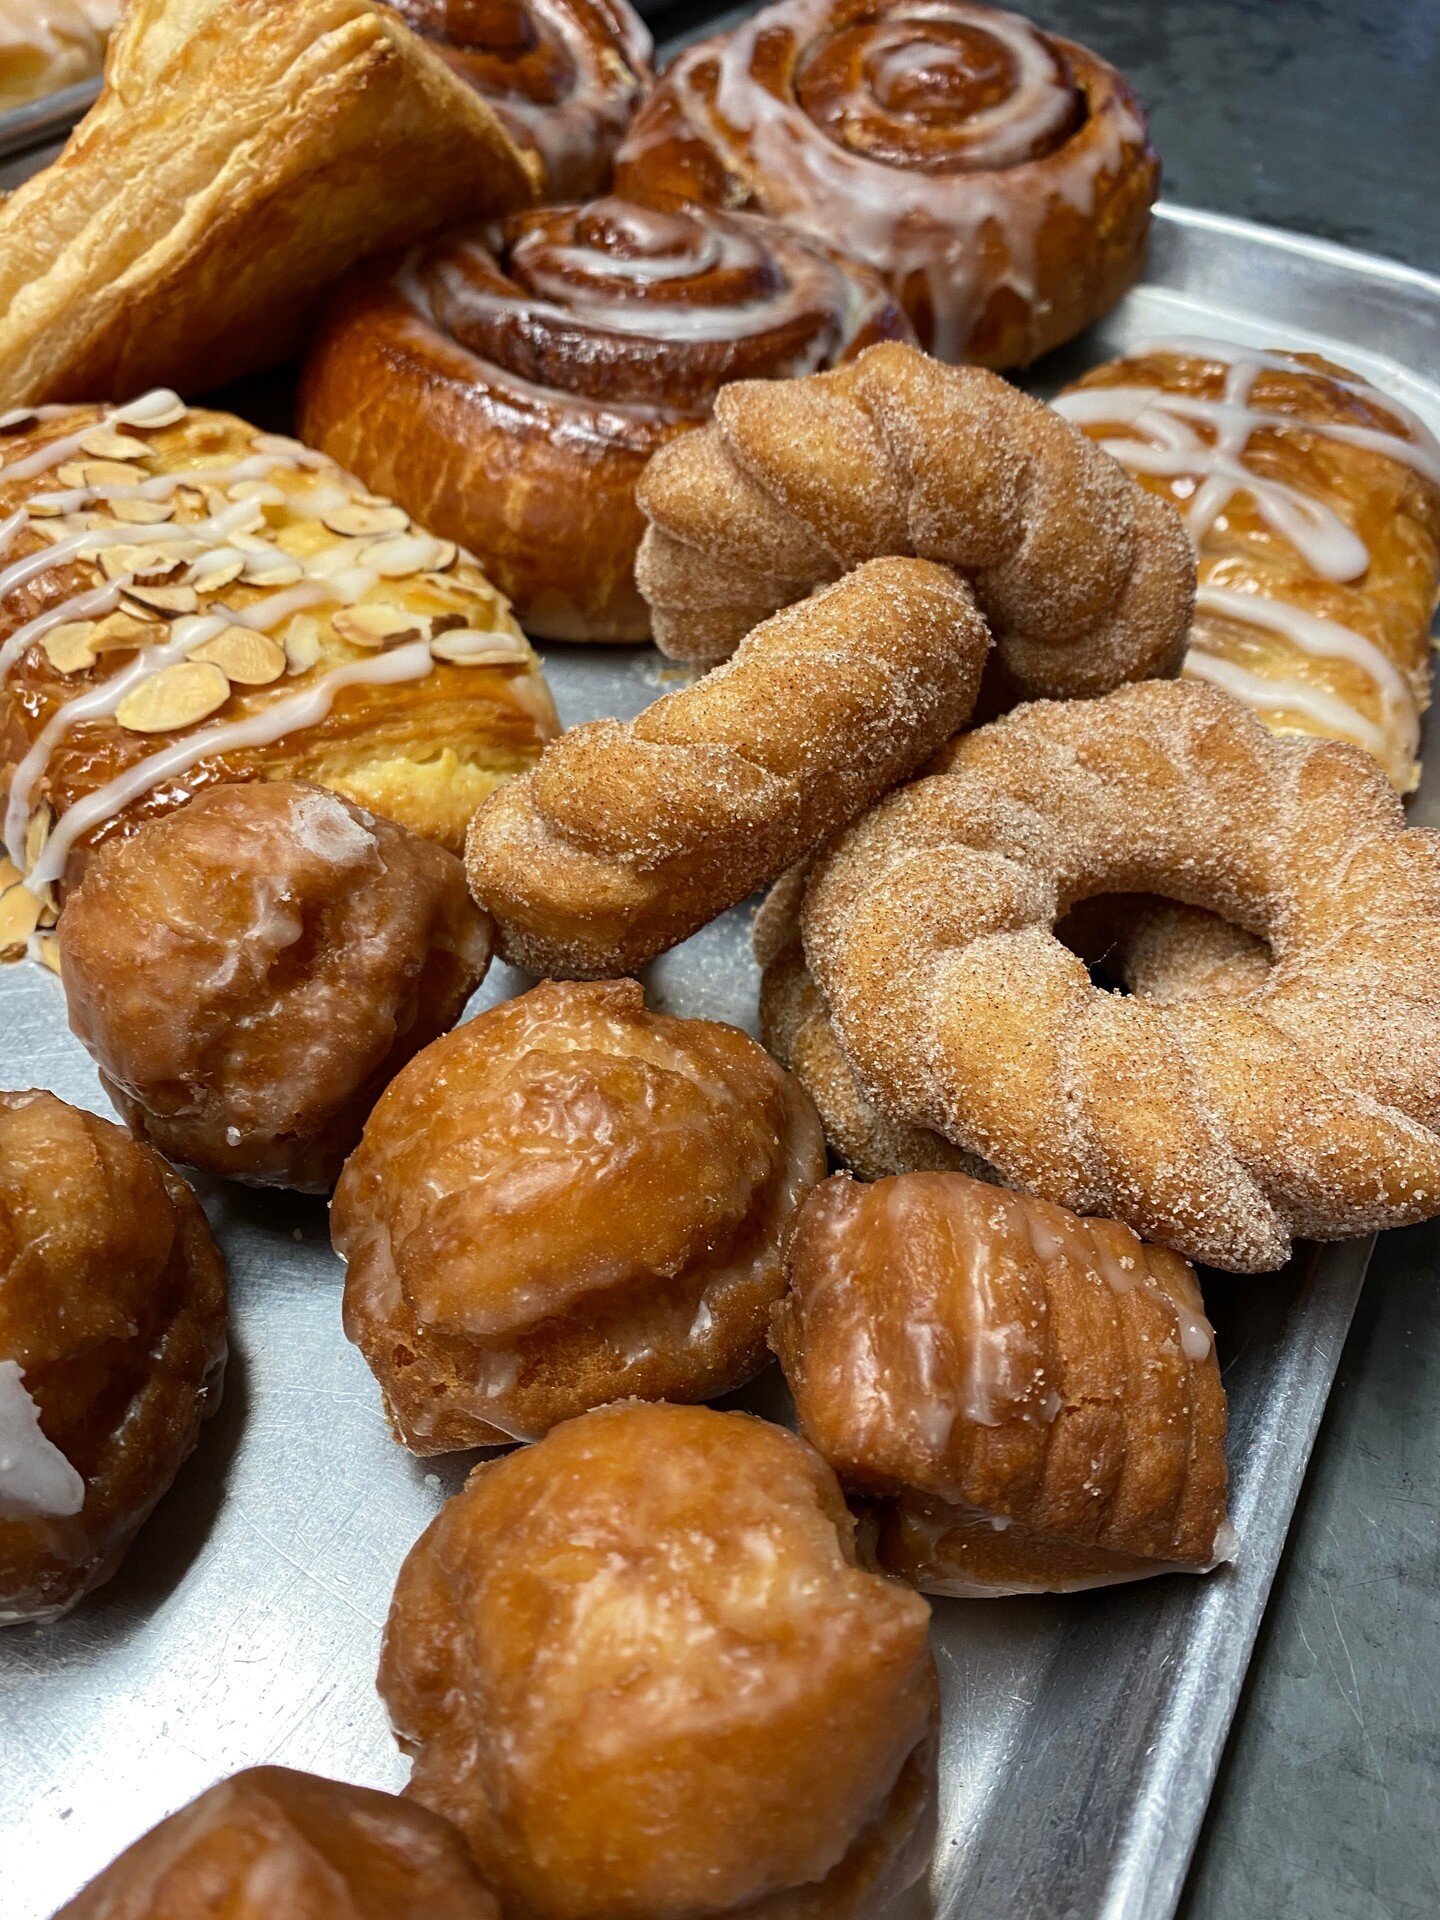 How lucky are we to live in a world where people still bake donuts fresh?  Shoutout to our bakers who start each day before the sun rises #freshbakeddaily